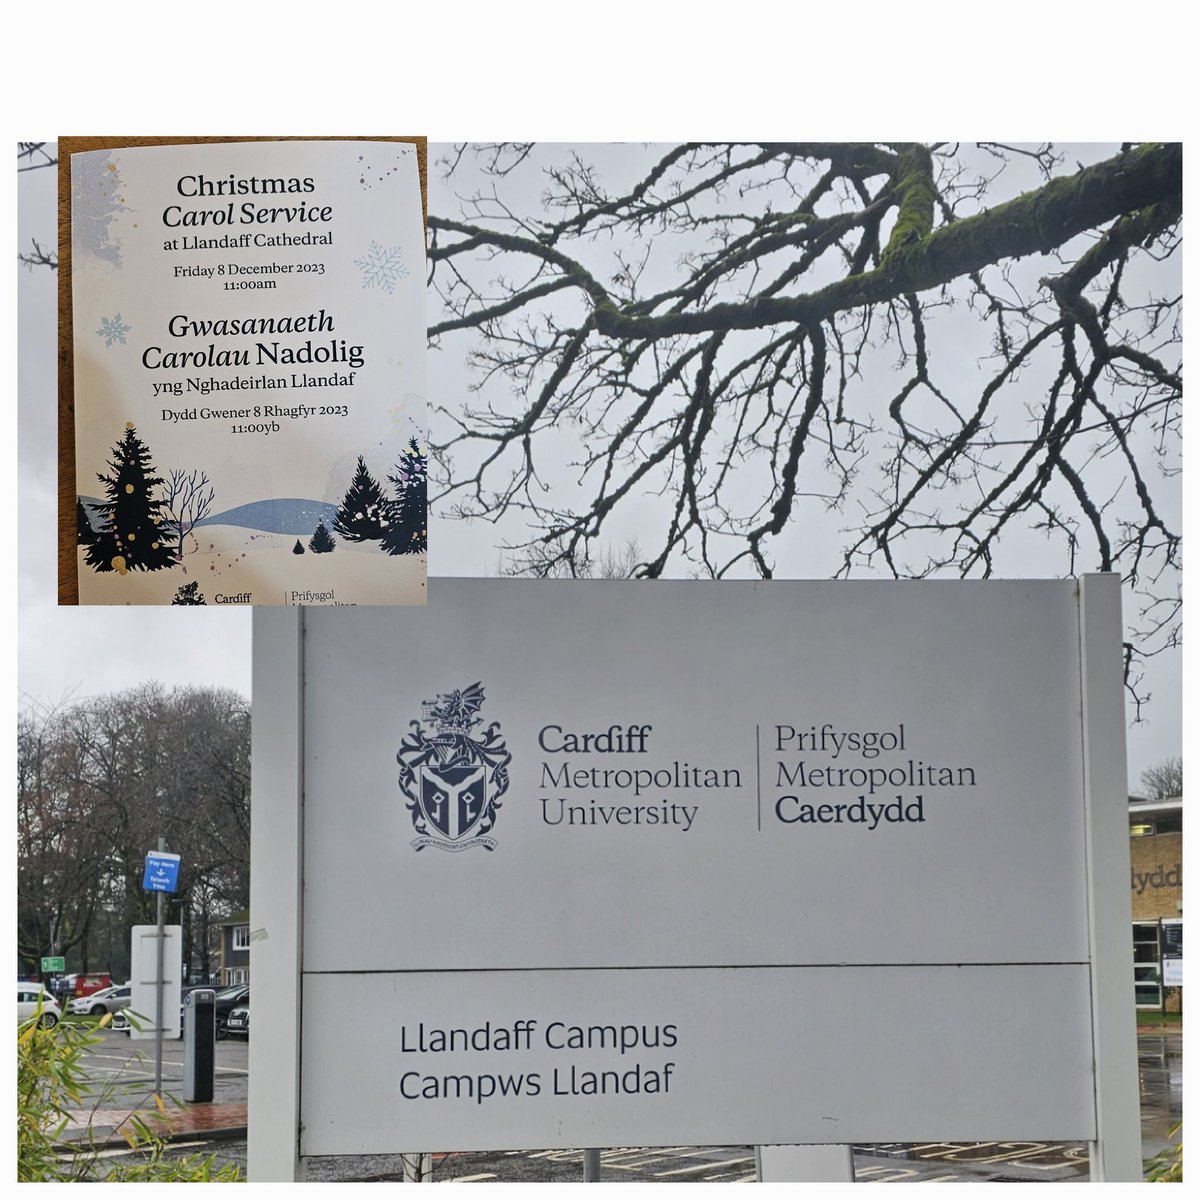 Stepping into #CardiffMet always fills my eyes with tears, yet my heart overflows with joy, swept away by waves of cherished memories. Forever grateful to @NatalieBuckland , @PaulFitzpatric9, @drgjroberts for pulling me out of utter darkness.